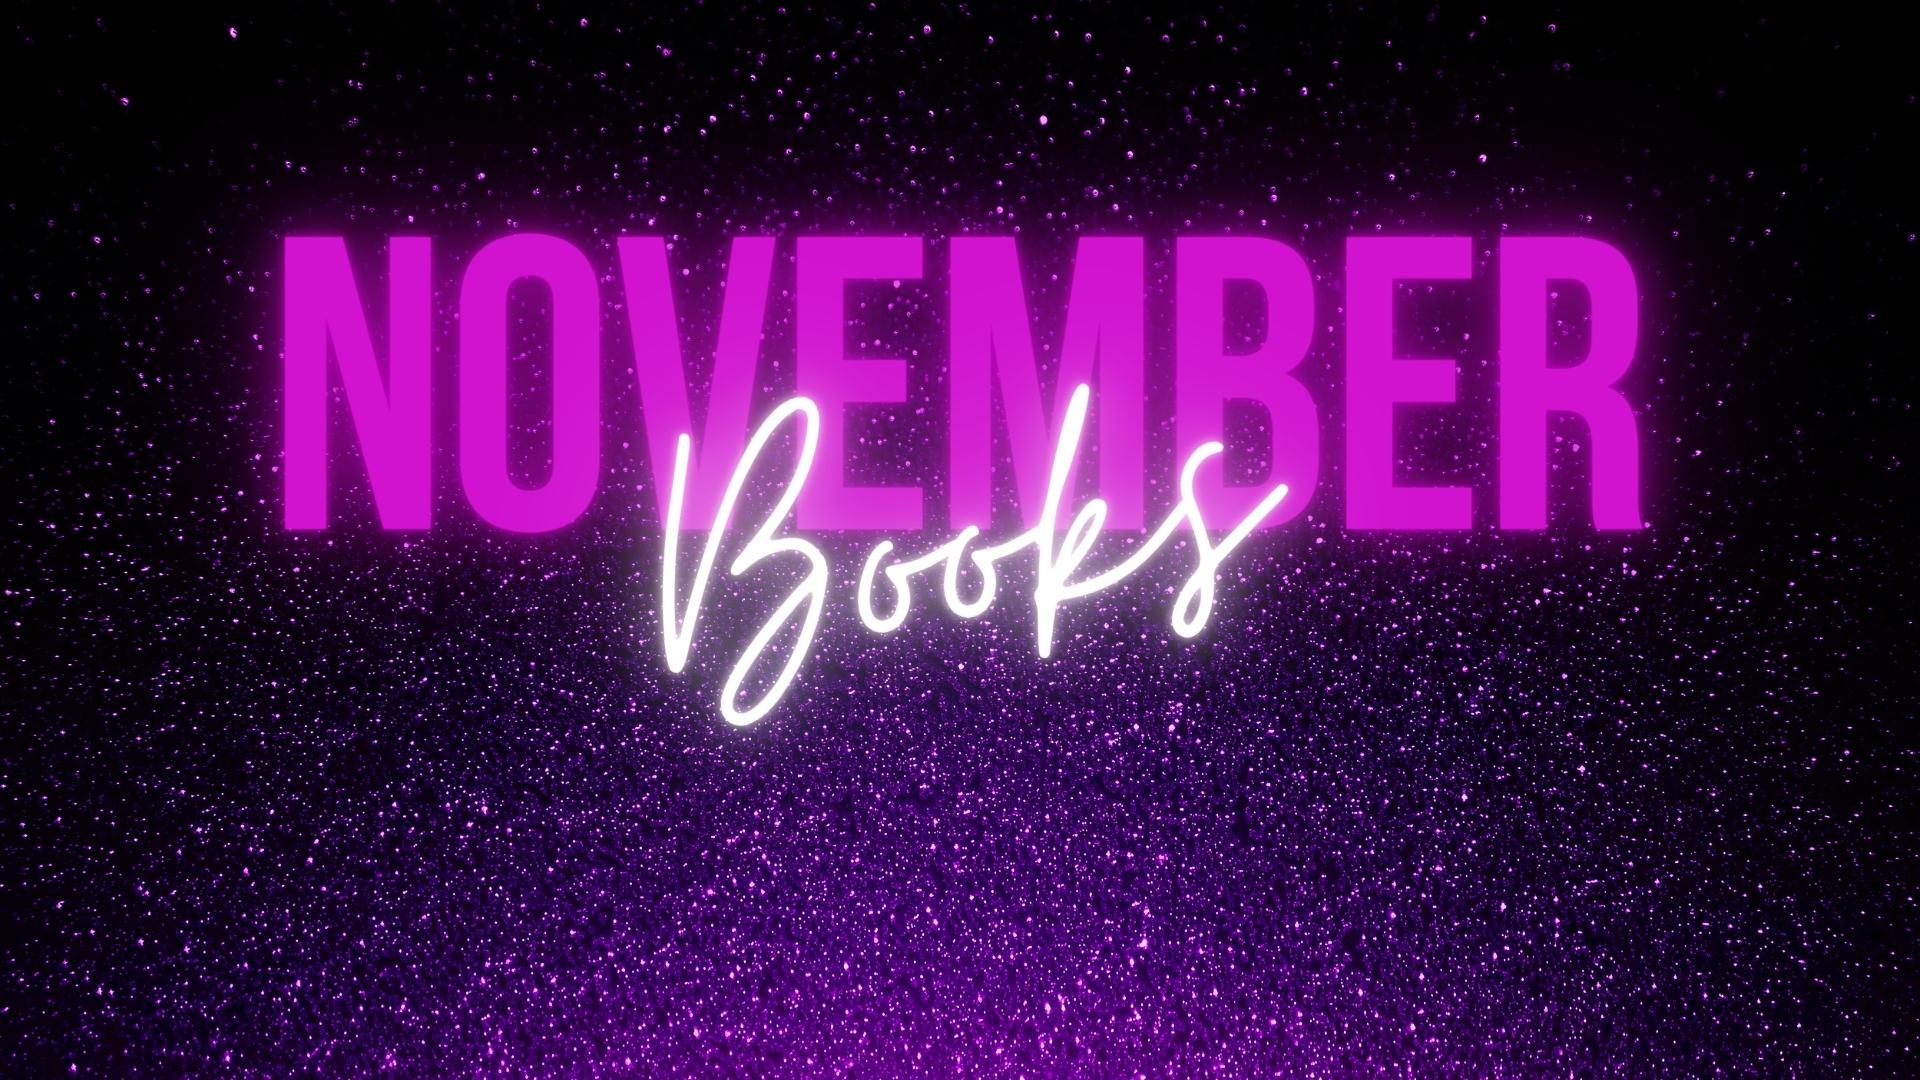 November Books of the Month!